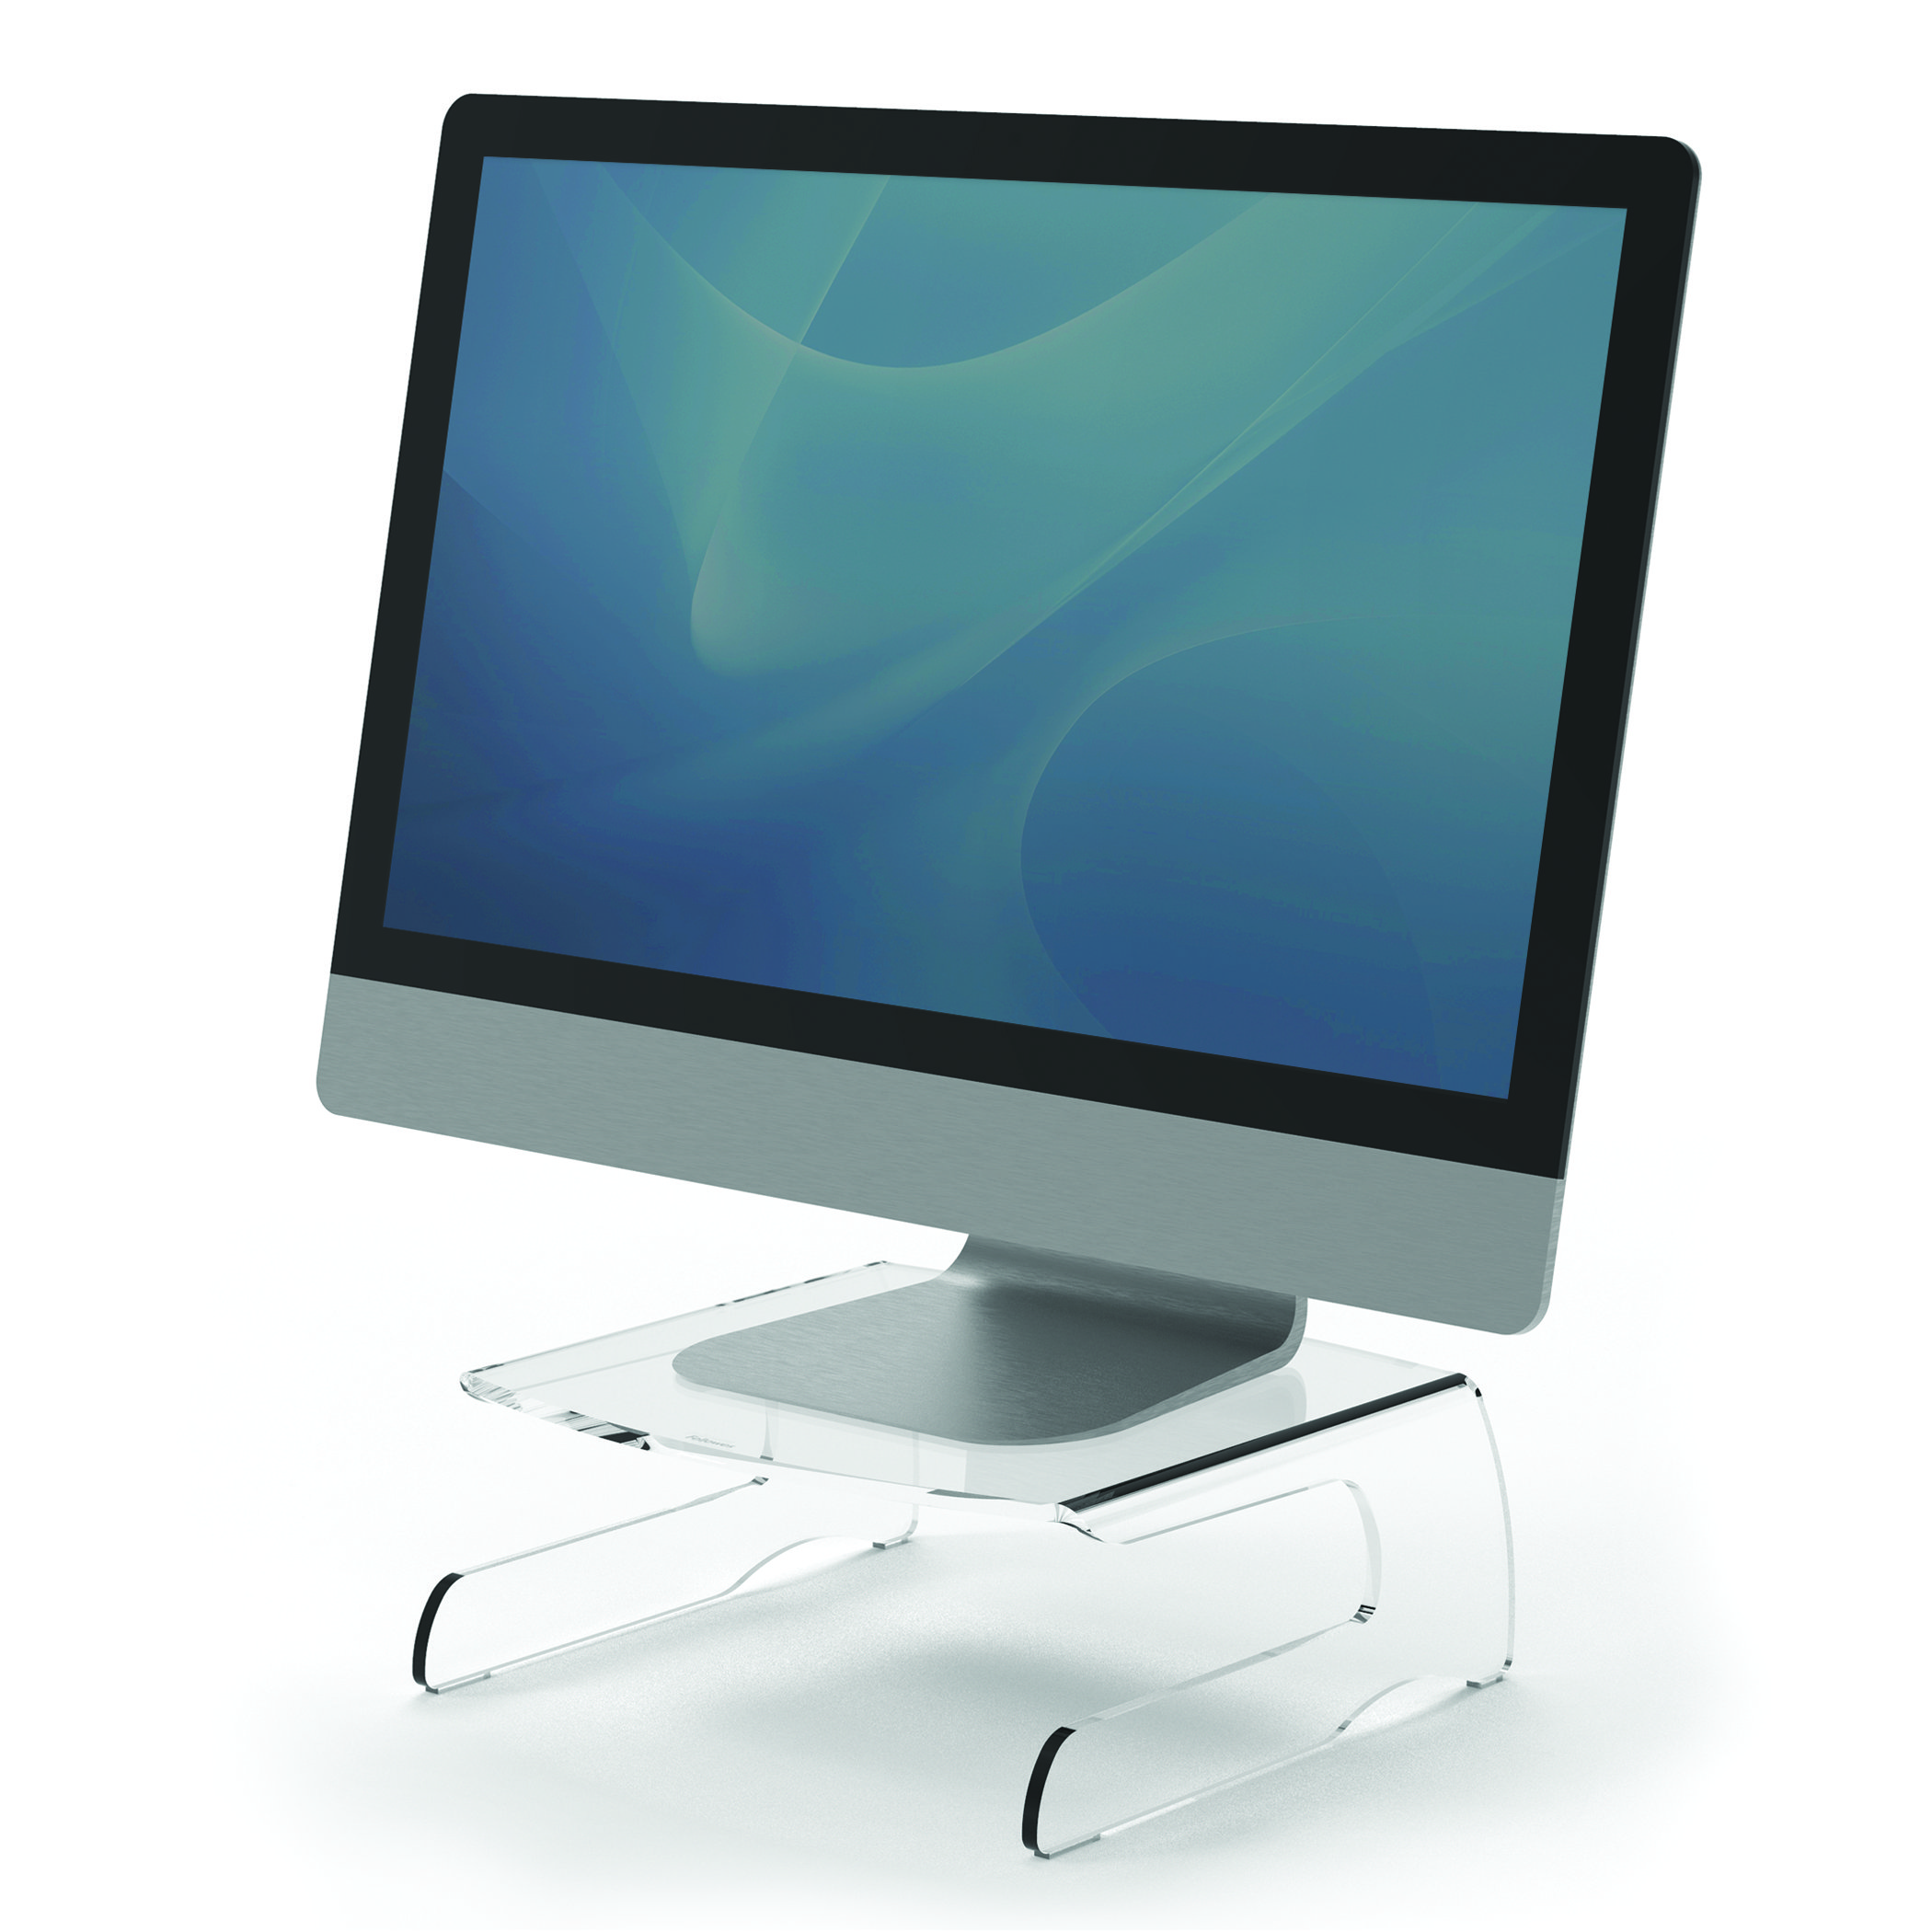 FELLOWES Notebook-stand, Transparent Clarity